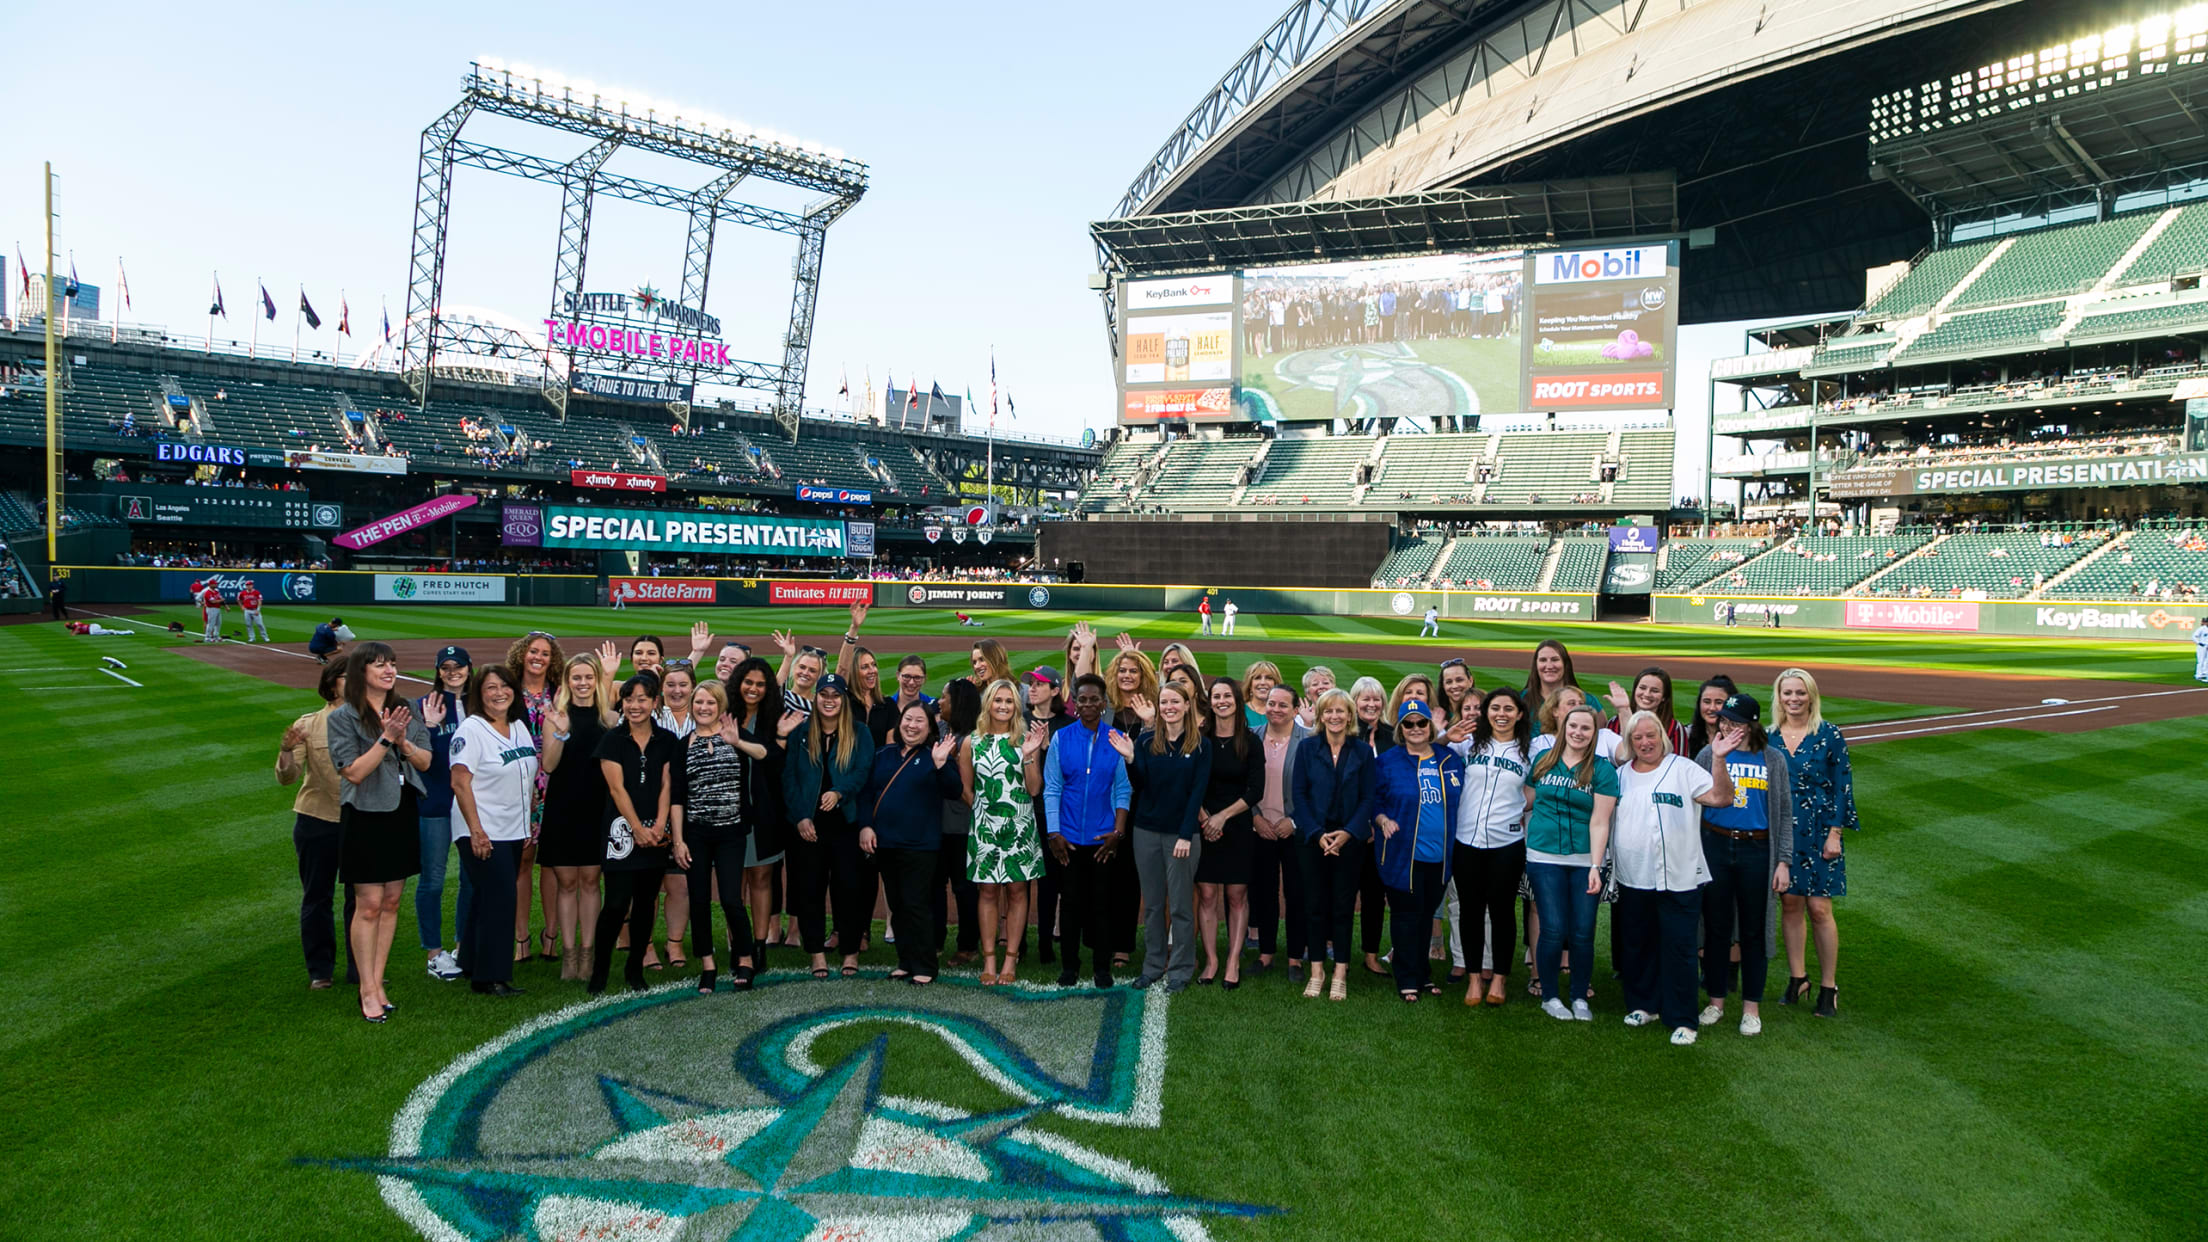 Seattle Mariners - The Mariners are proud to celebrate equality